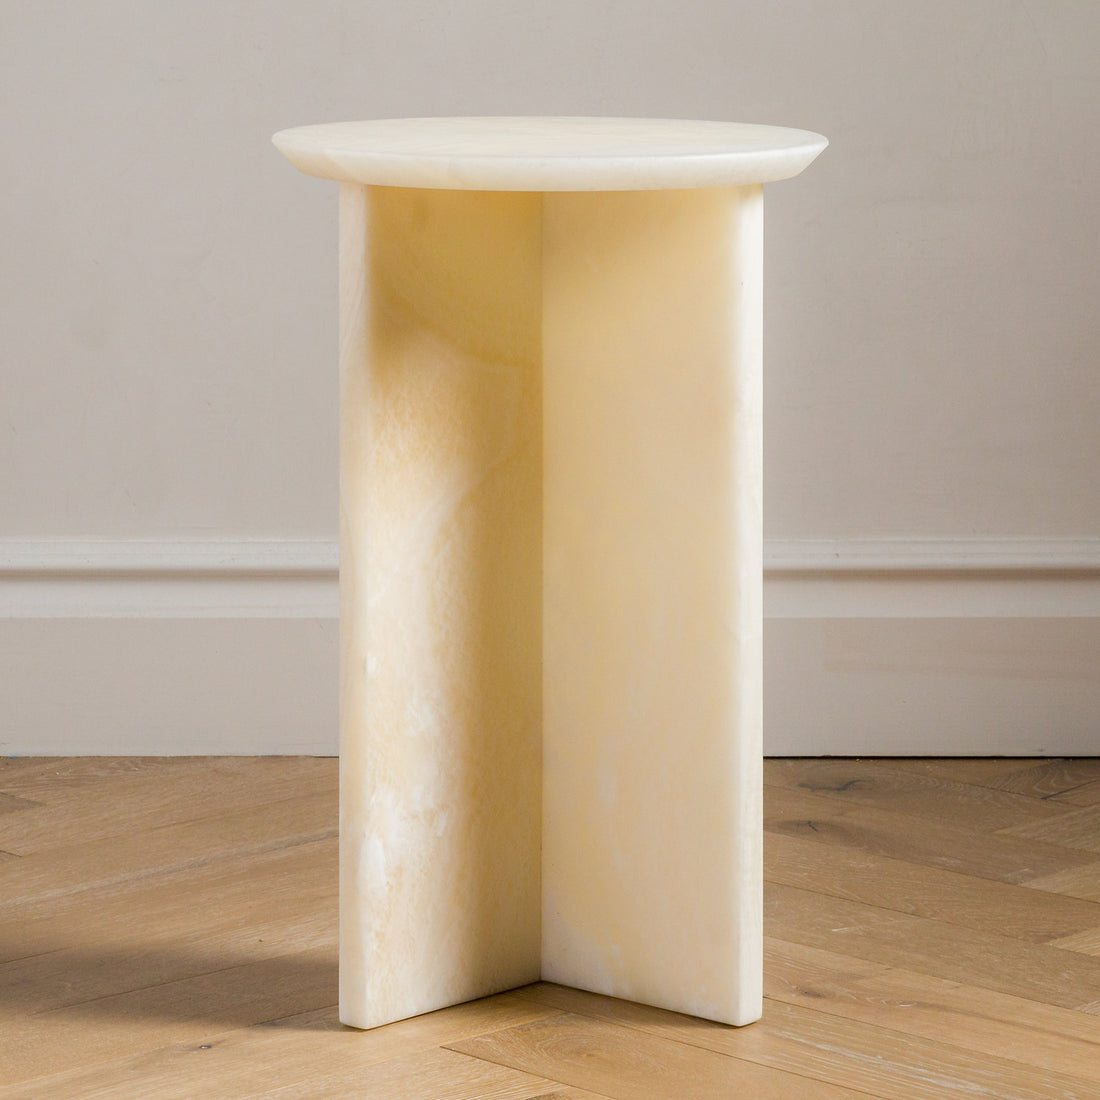 Studio H Collection Valentina Stone Cocktail Table